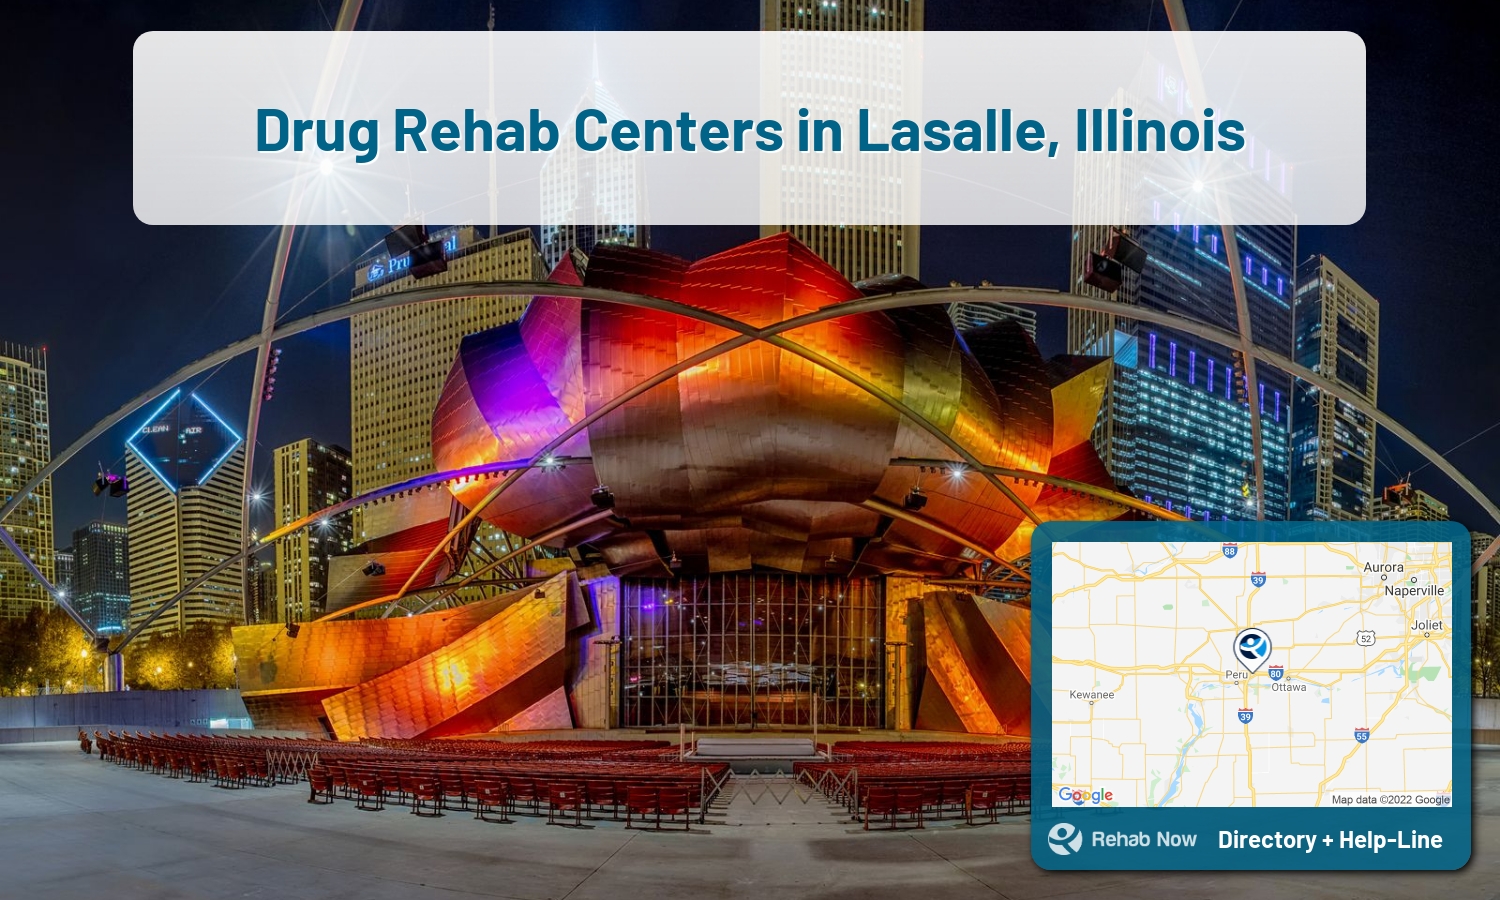 List of alcohol and drug treatment centers near you in Lasalle, Illinois. Research certifications, programs, methods, pricing, and more.